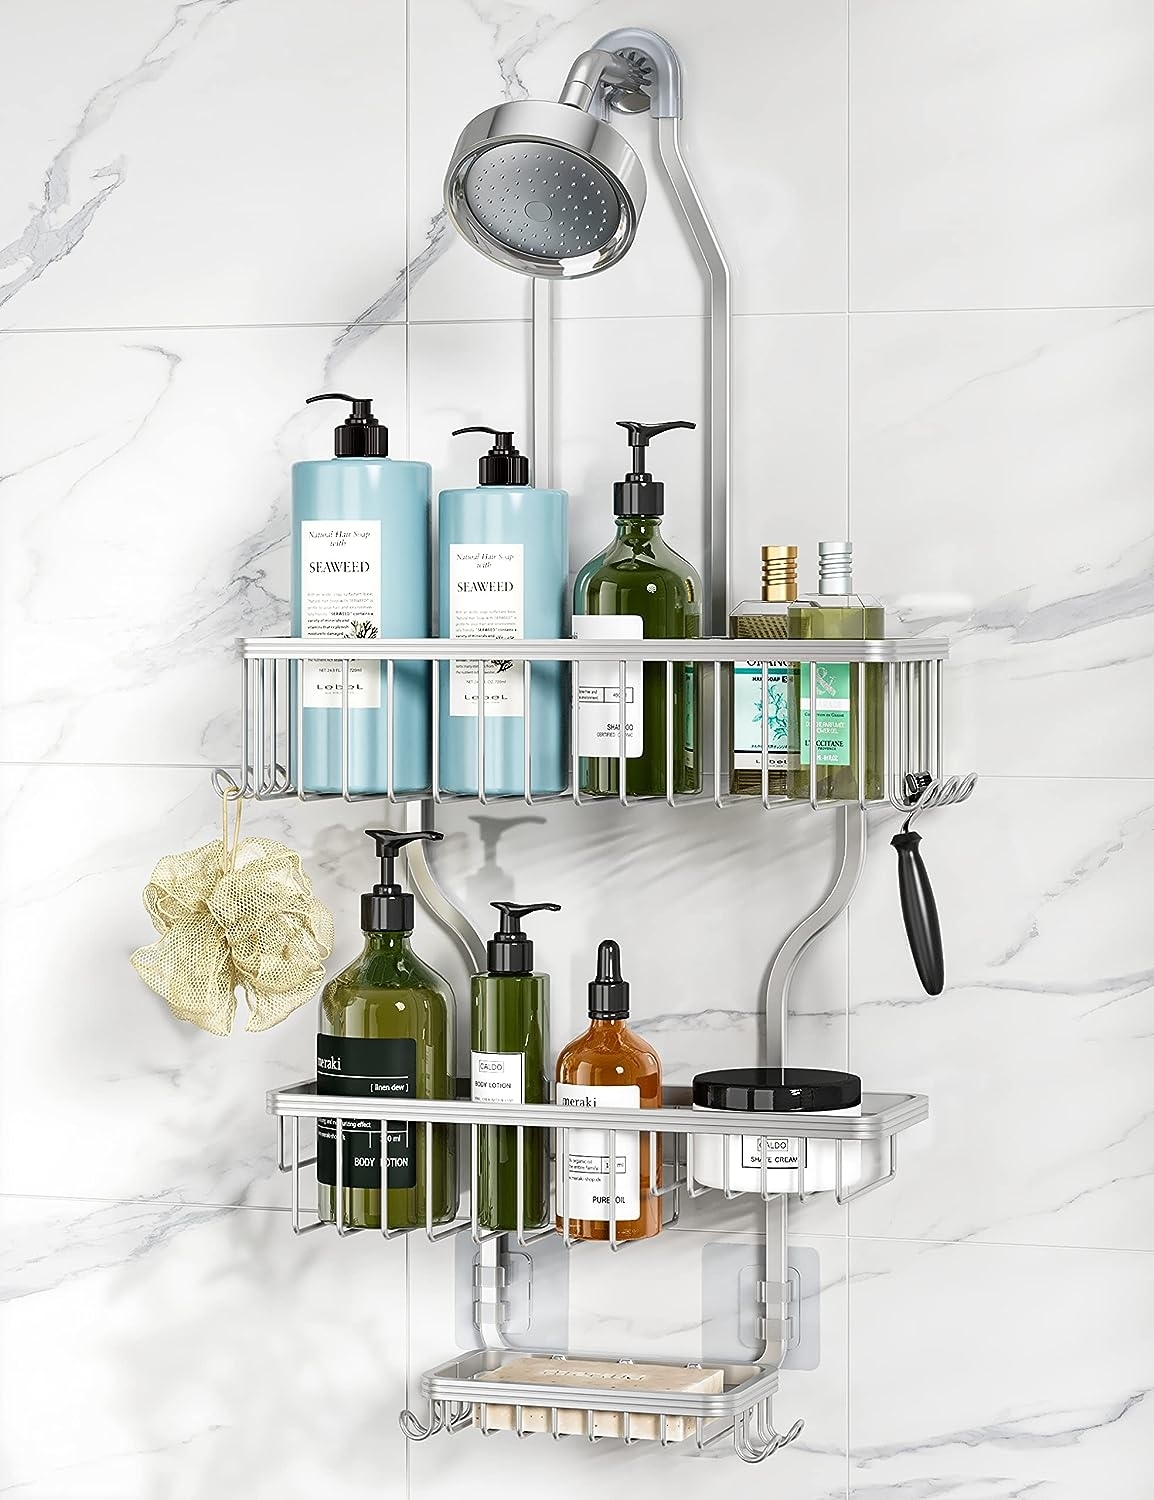 Silver shower shelf holding various hygiene products